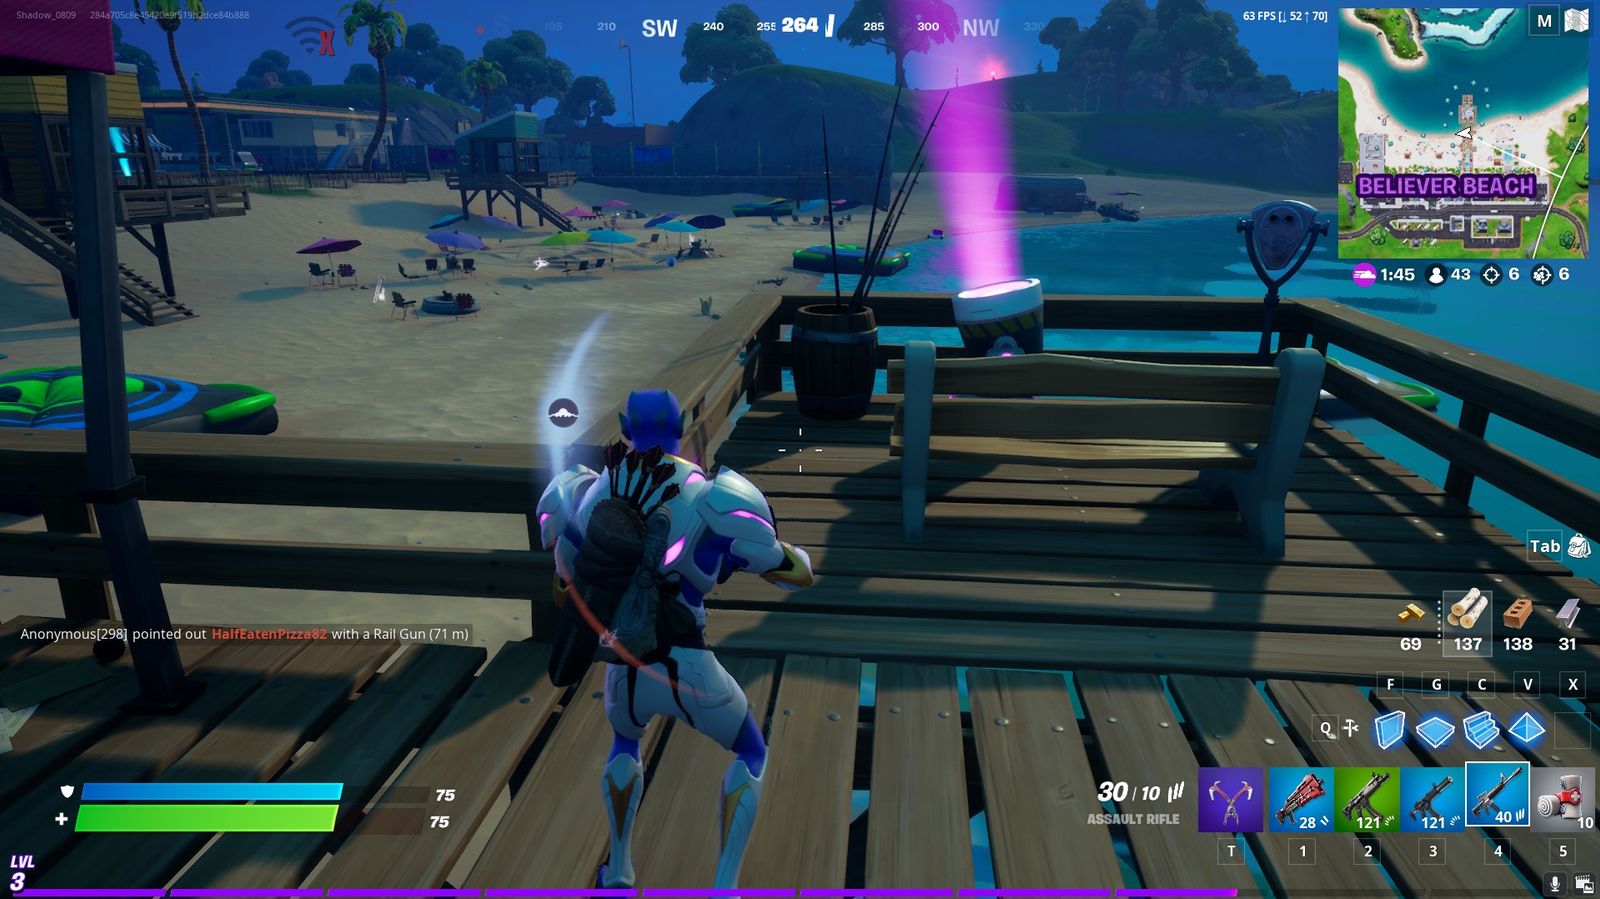 The second barrel at Believer Beach (Image via Epic Games)